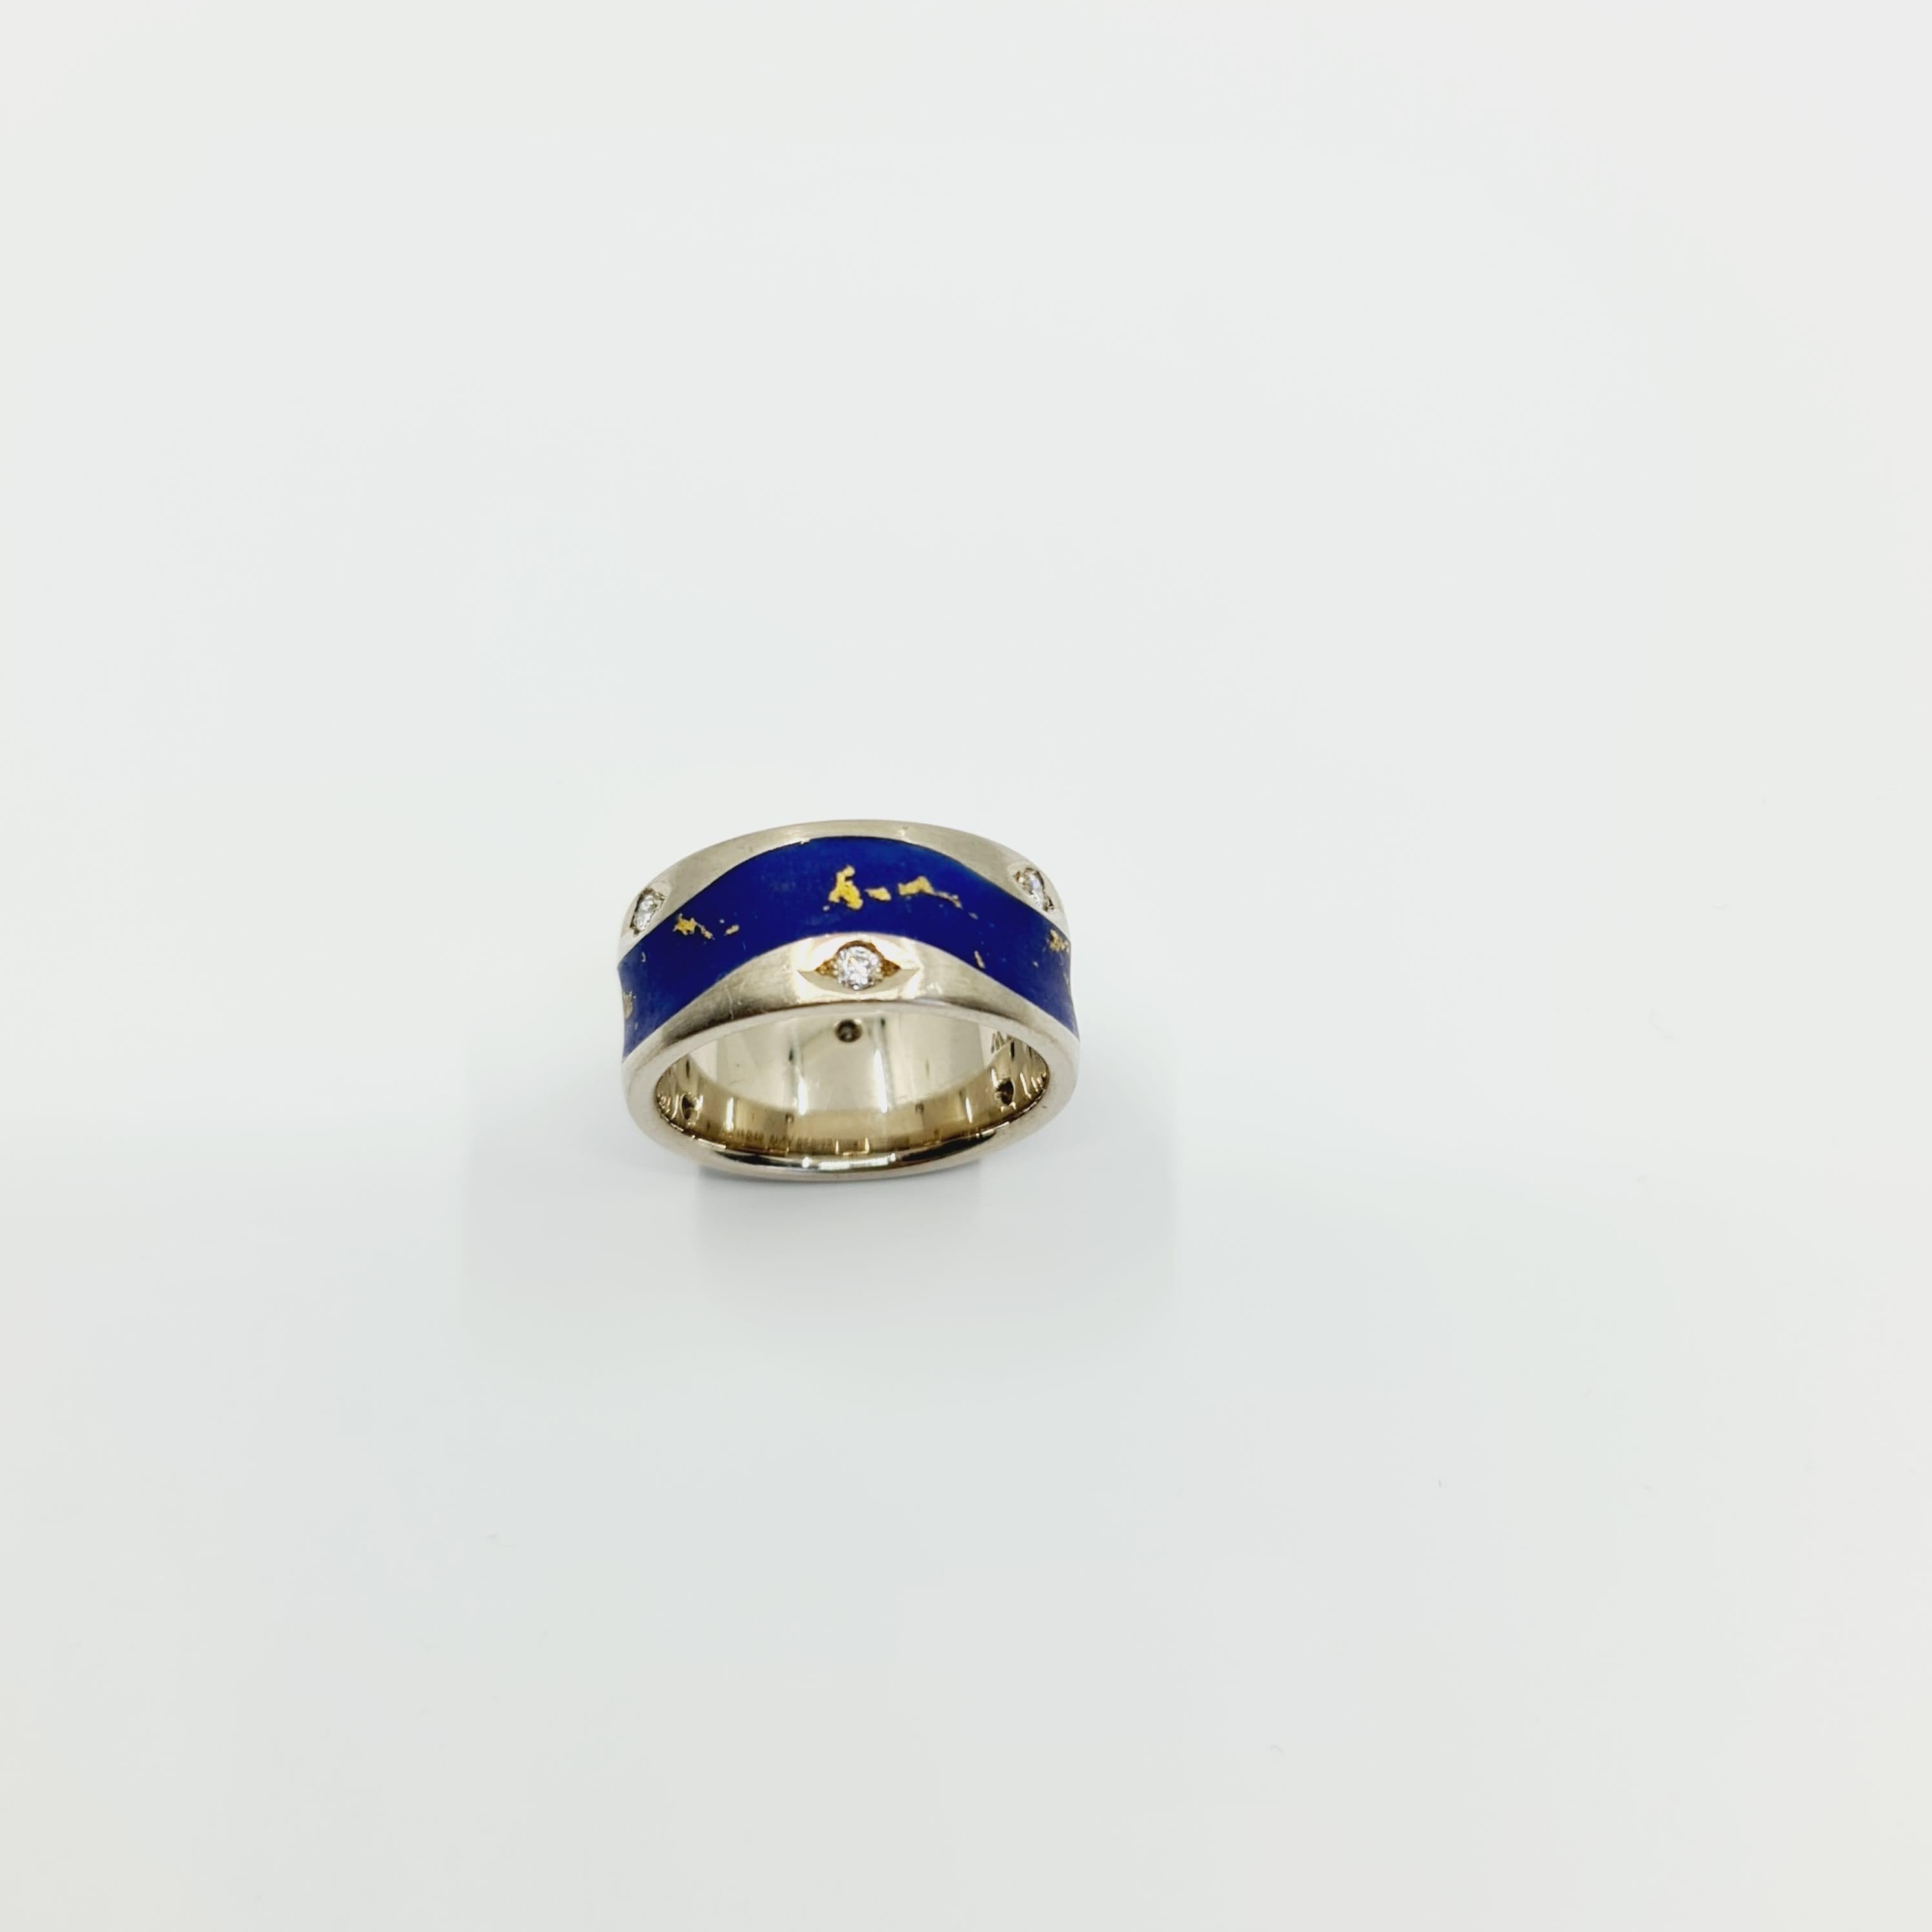 0.21 Carat Diamond Ring G/SI1 18k White Gold, Blue / Yellow Enamel, 6 Brillants In New Condition For Sale In Darmstadt, DE